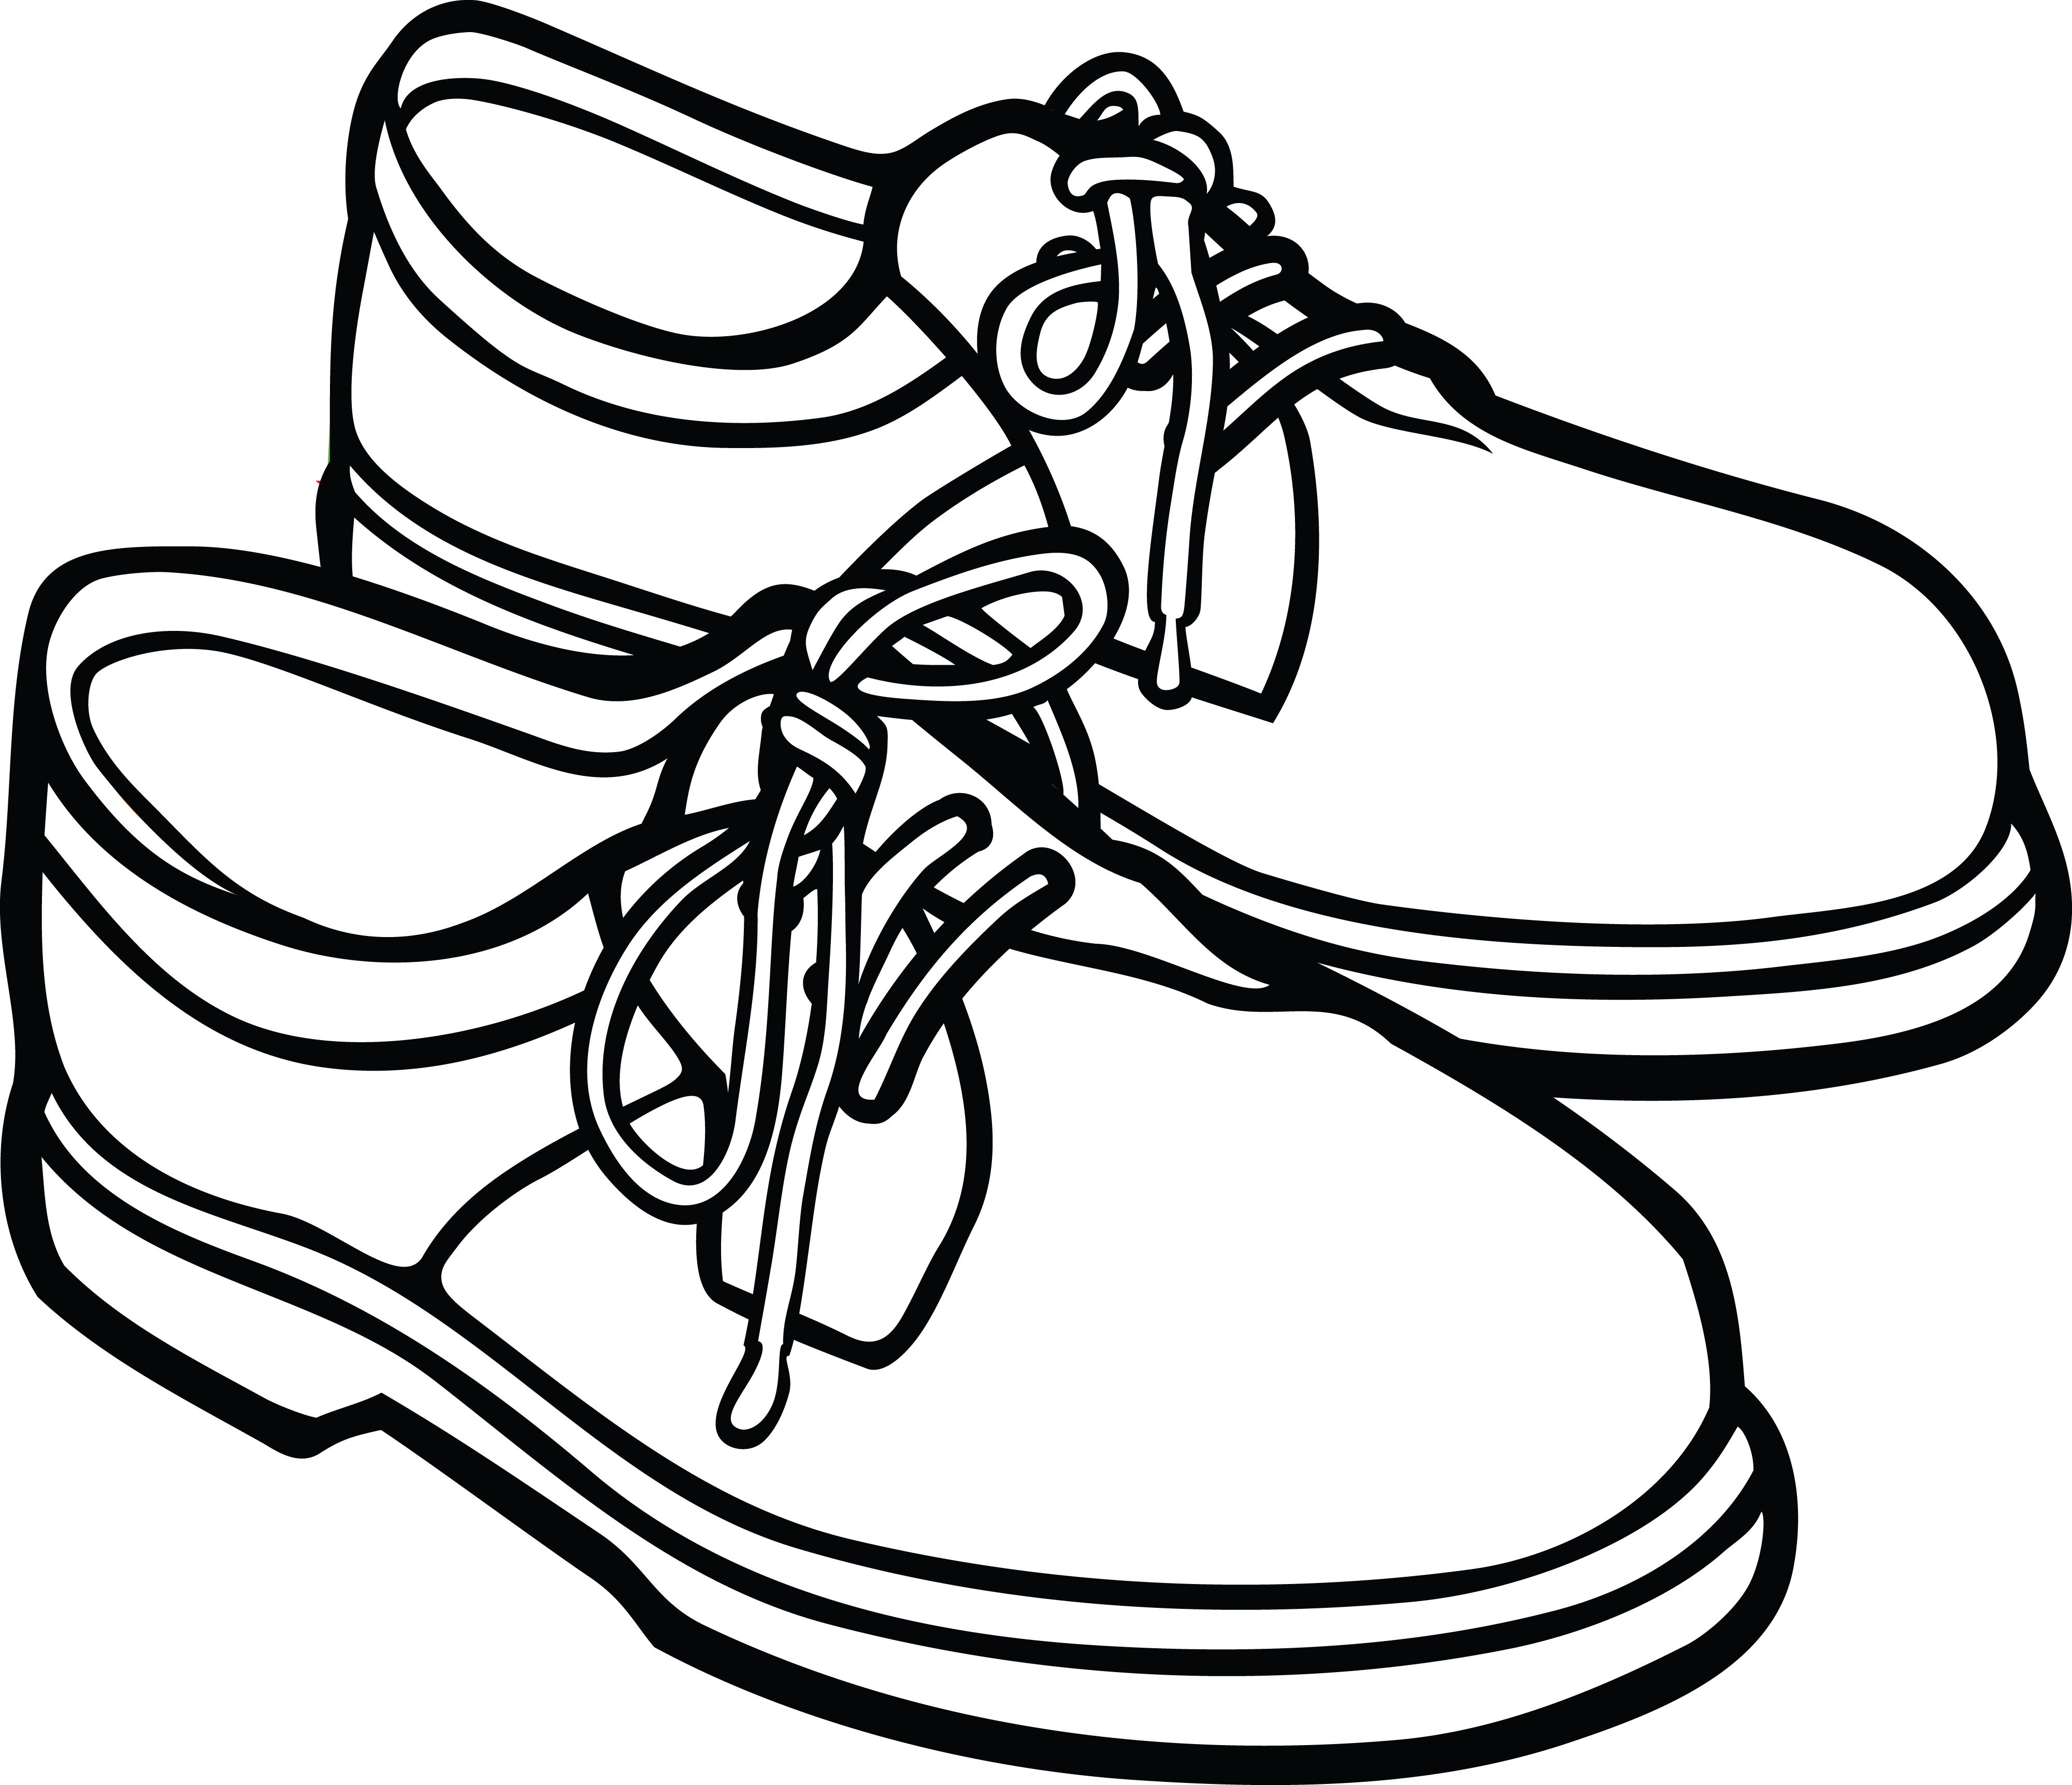 Clipart Of A pair of mens shoes_free